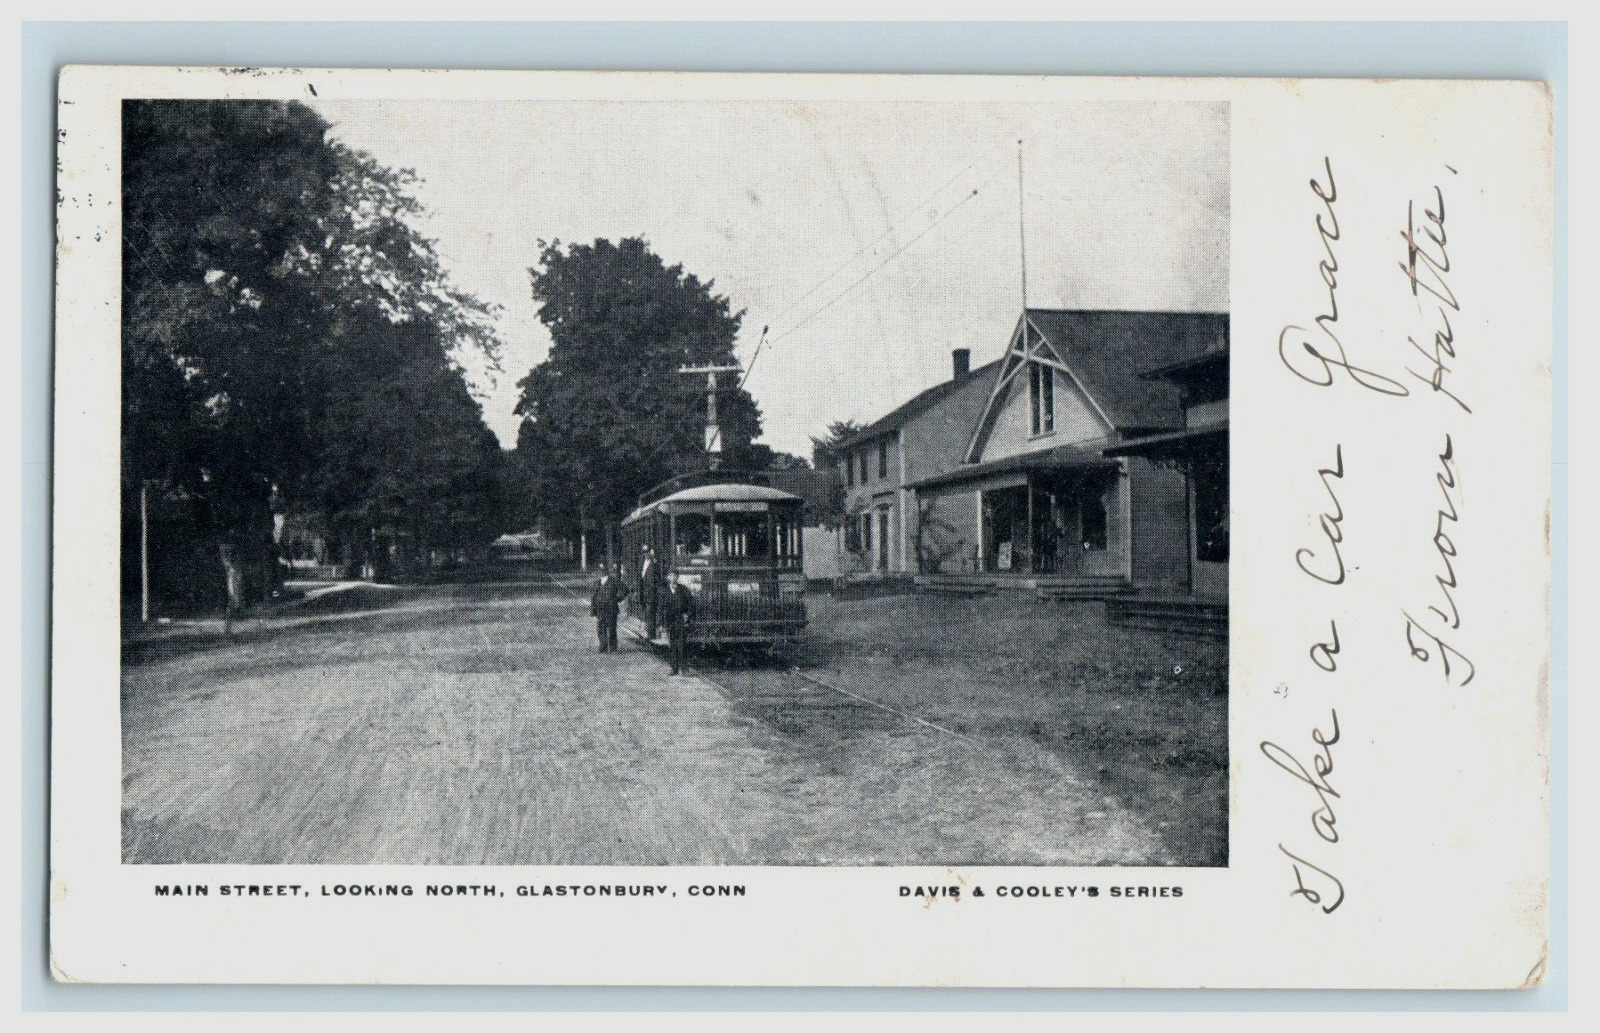 1907 Main Street View Glastonbury CT Trolley Davis & Cooley's Series Posted